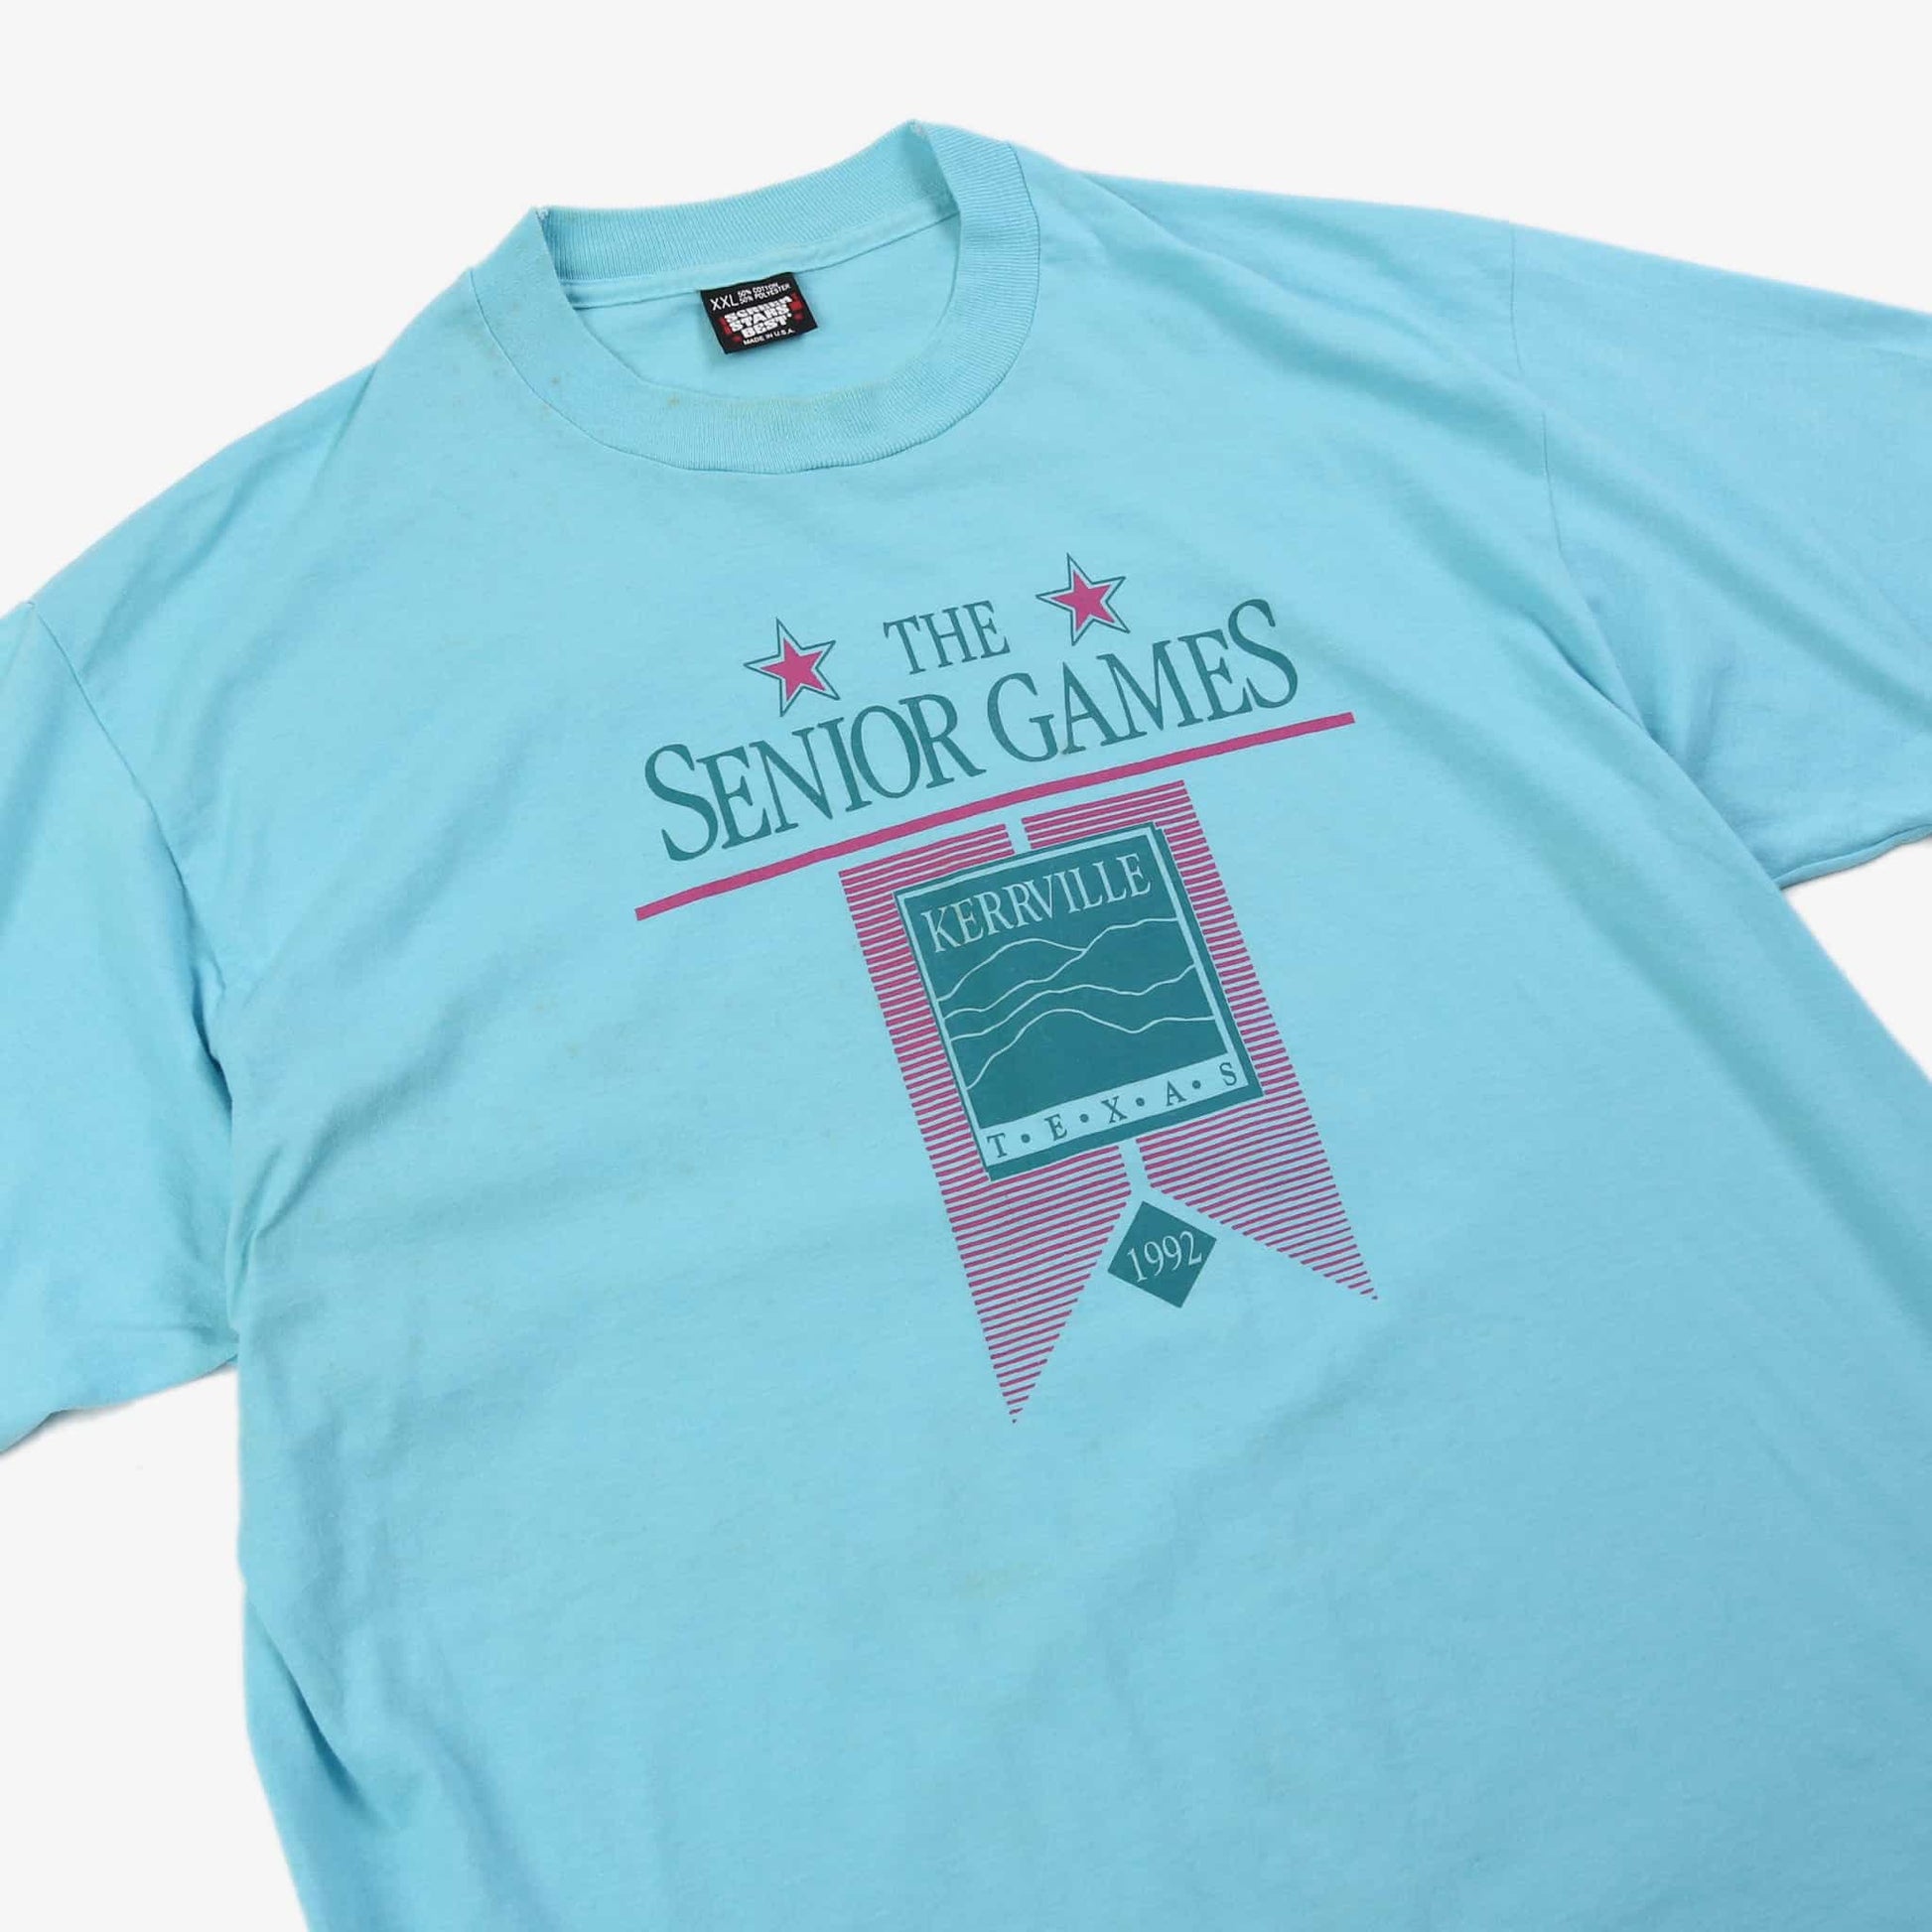 Vintage 'The Senior Games 1992' T-Shirt - American Madness